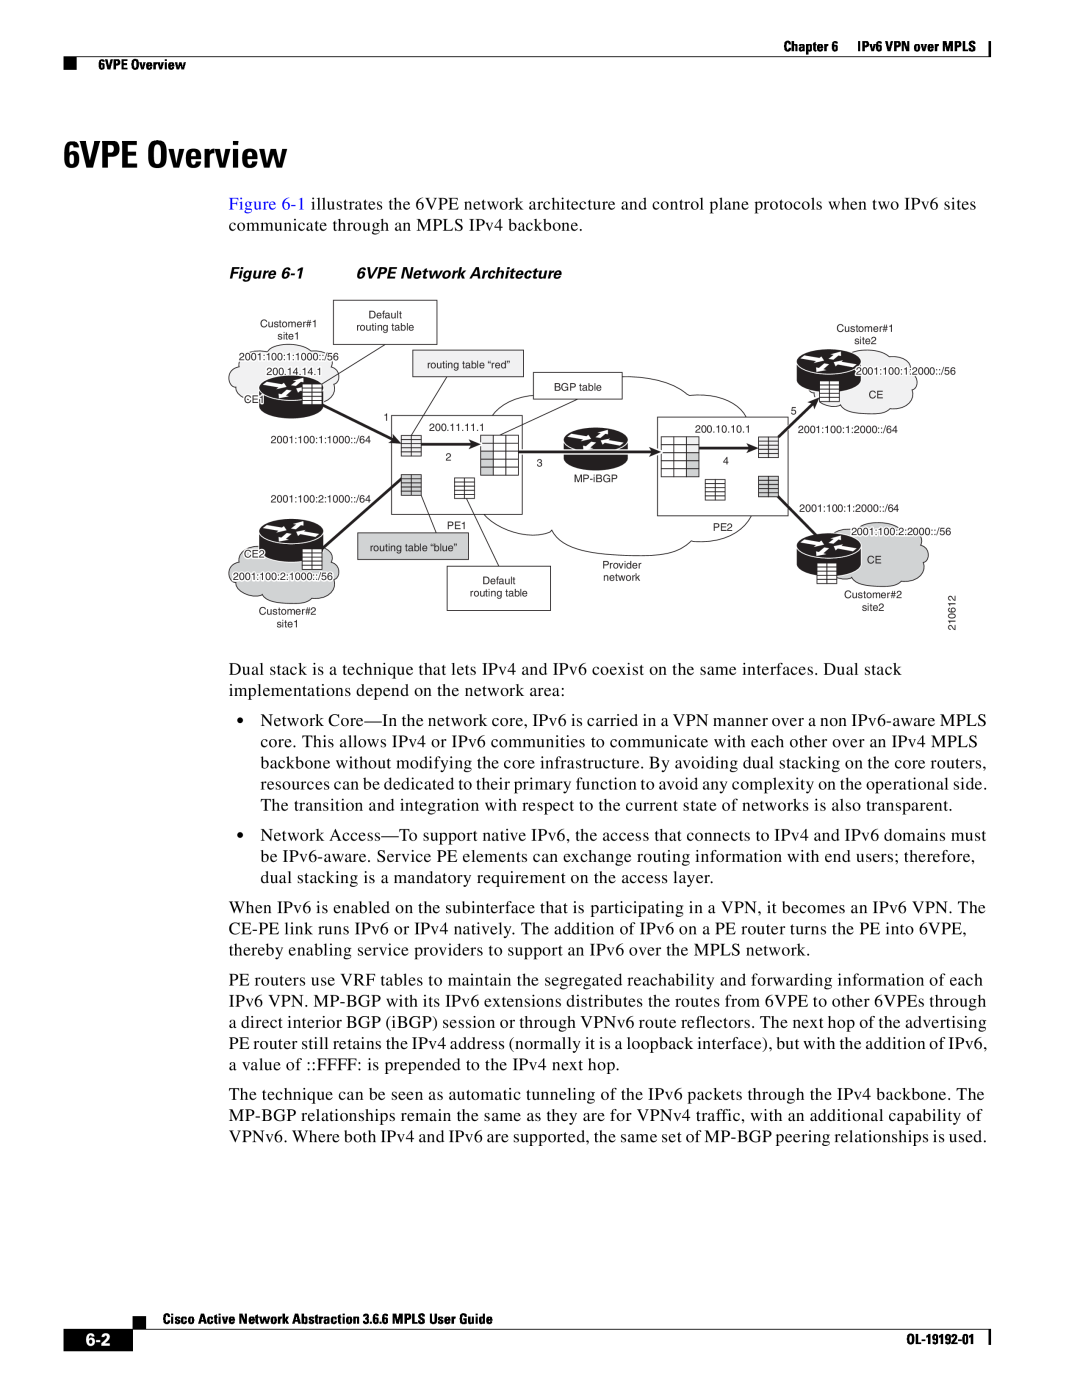 Cisco Systems 3.6.6 manual 6VPE Overview, 1 6VPE Network Architecture 